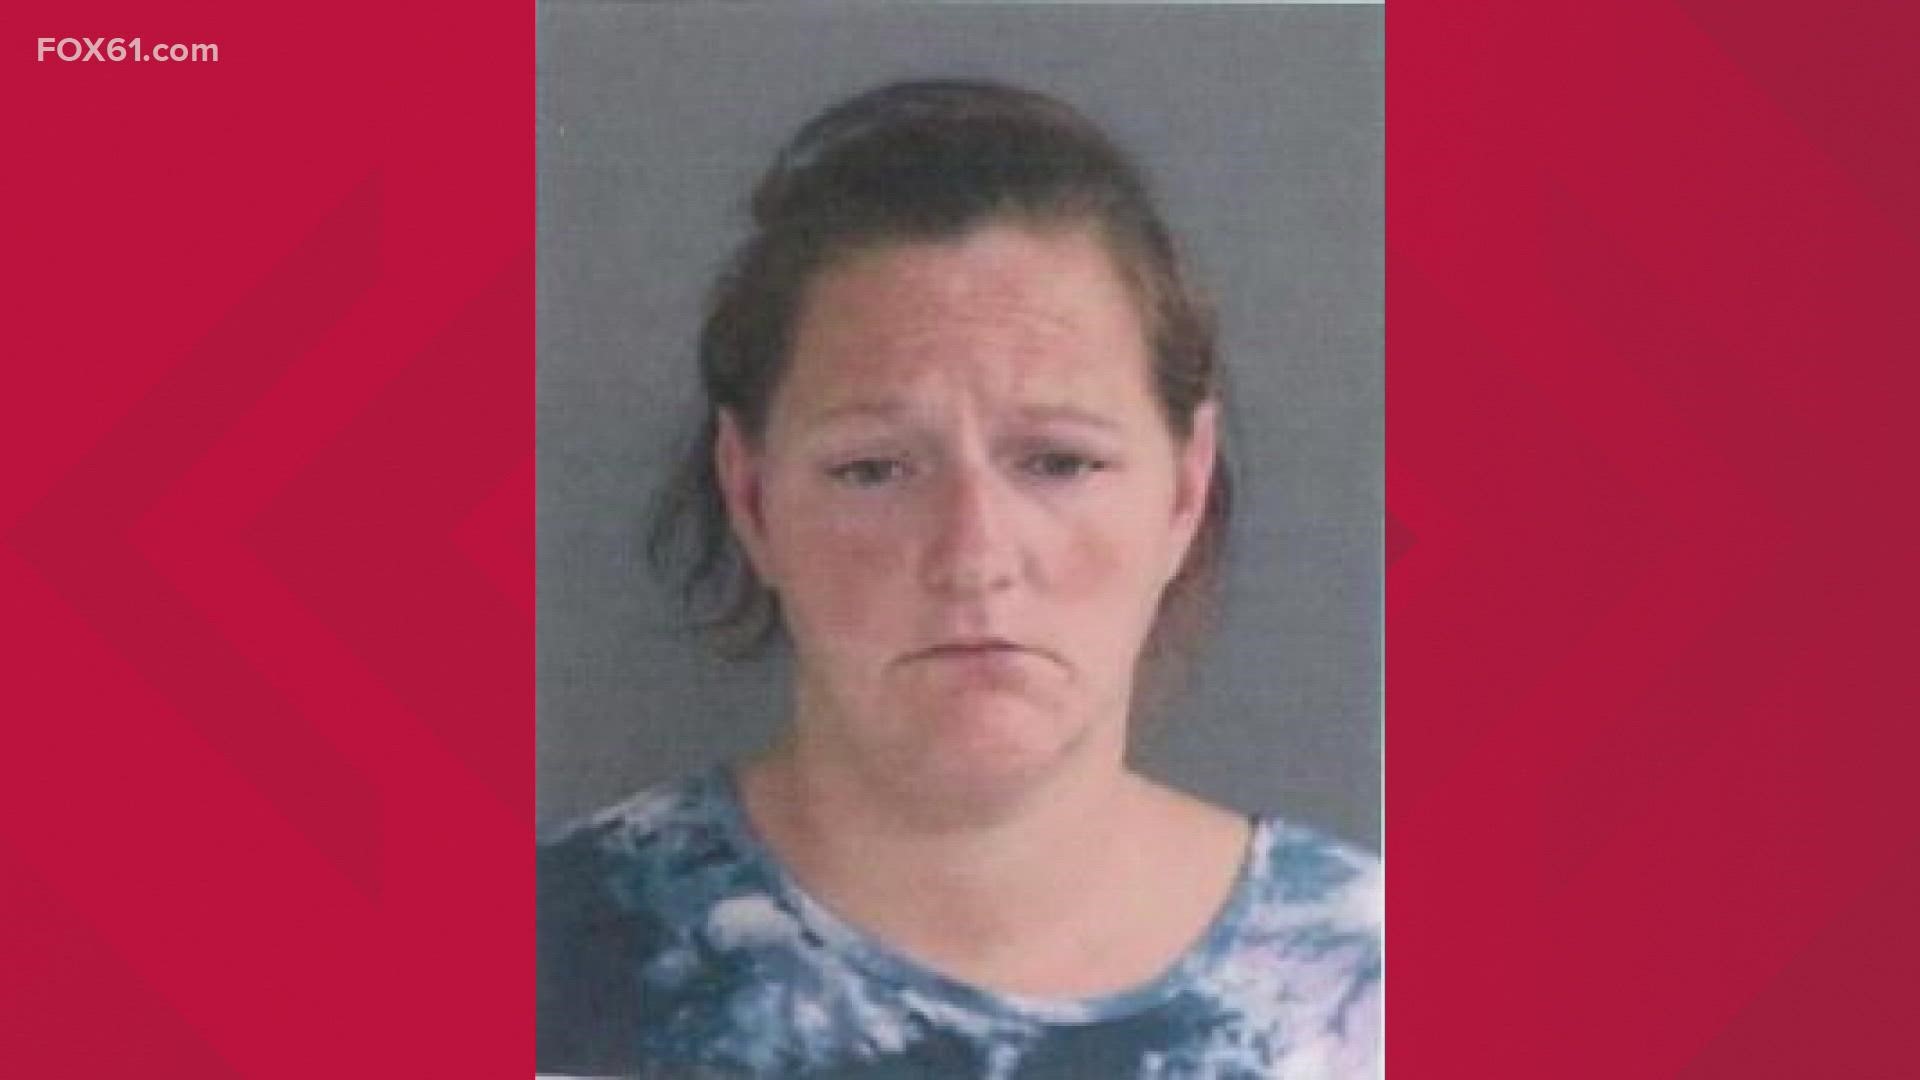 State police said they arrested Crystal Czyzewski, 35, and charged her with manslaughter and risk of injury to a child.